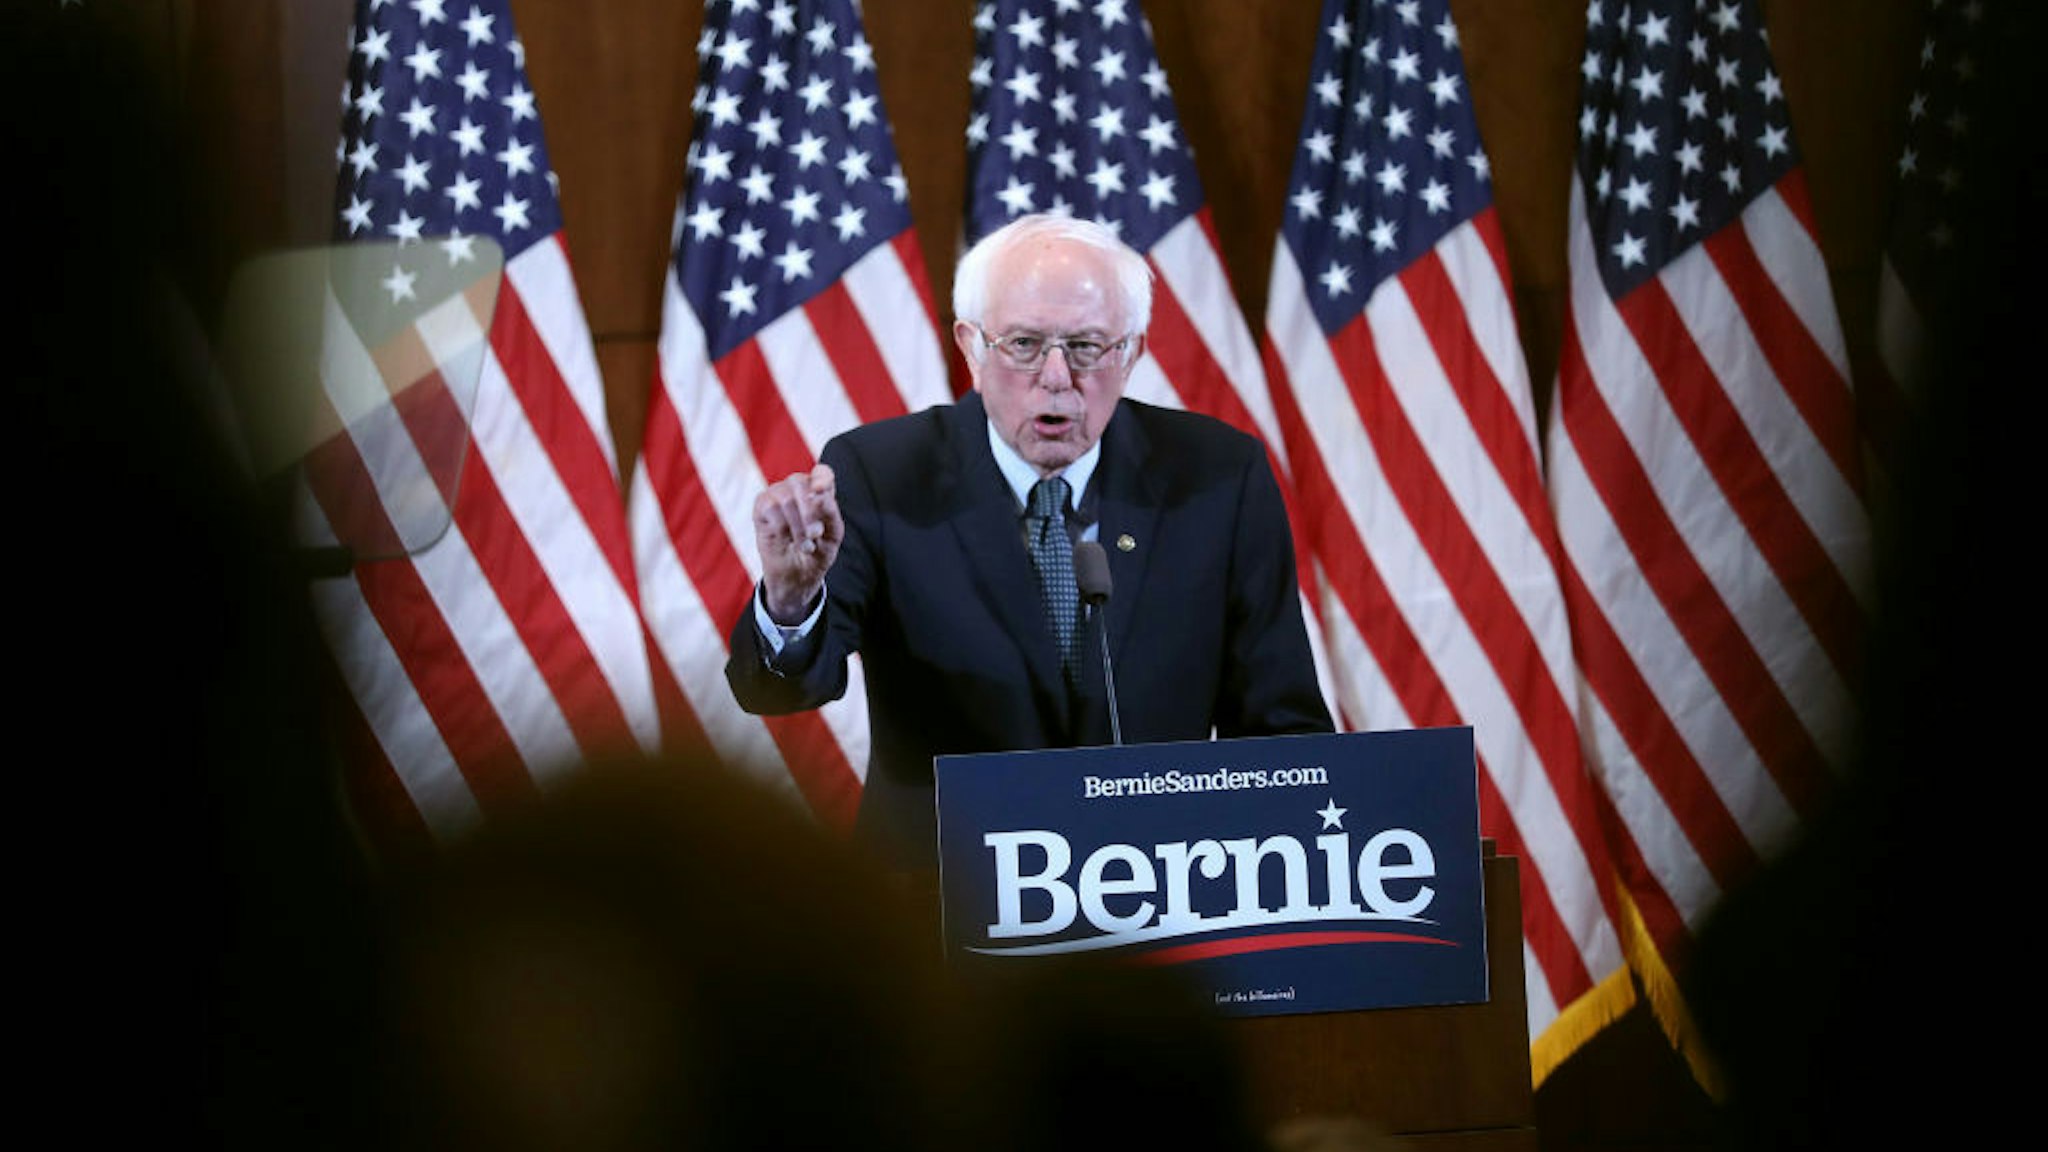 Democratic presidential candidate Sen. Bernie Sanders (I-VT) speaks during a State of the Union Response on February 04, 2020 in Manchester, New Hampshire. Sanders was responding to the State of the Union speech given by President Donald Trump at the U.S. Capitol. (Photo by Joe Raedle/Getty Images)